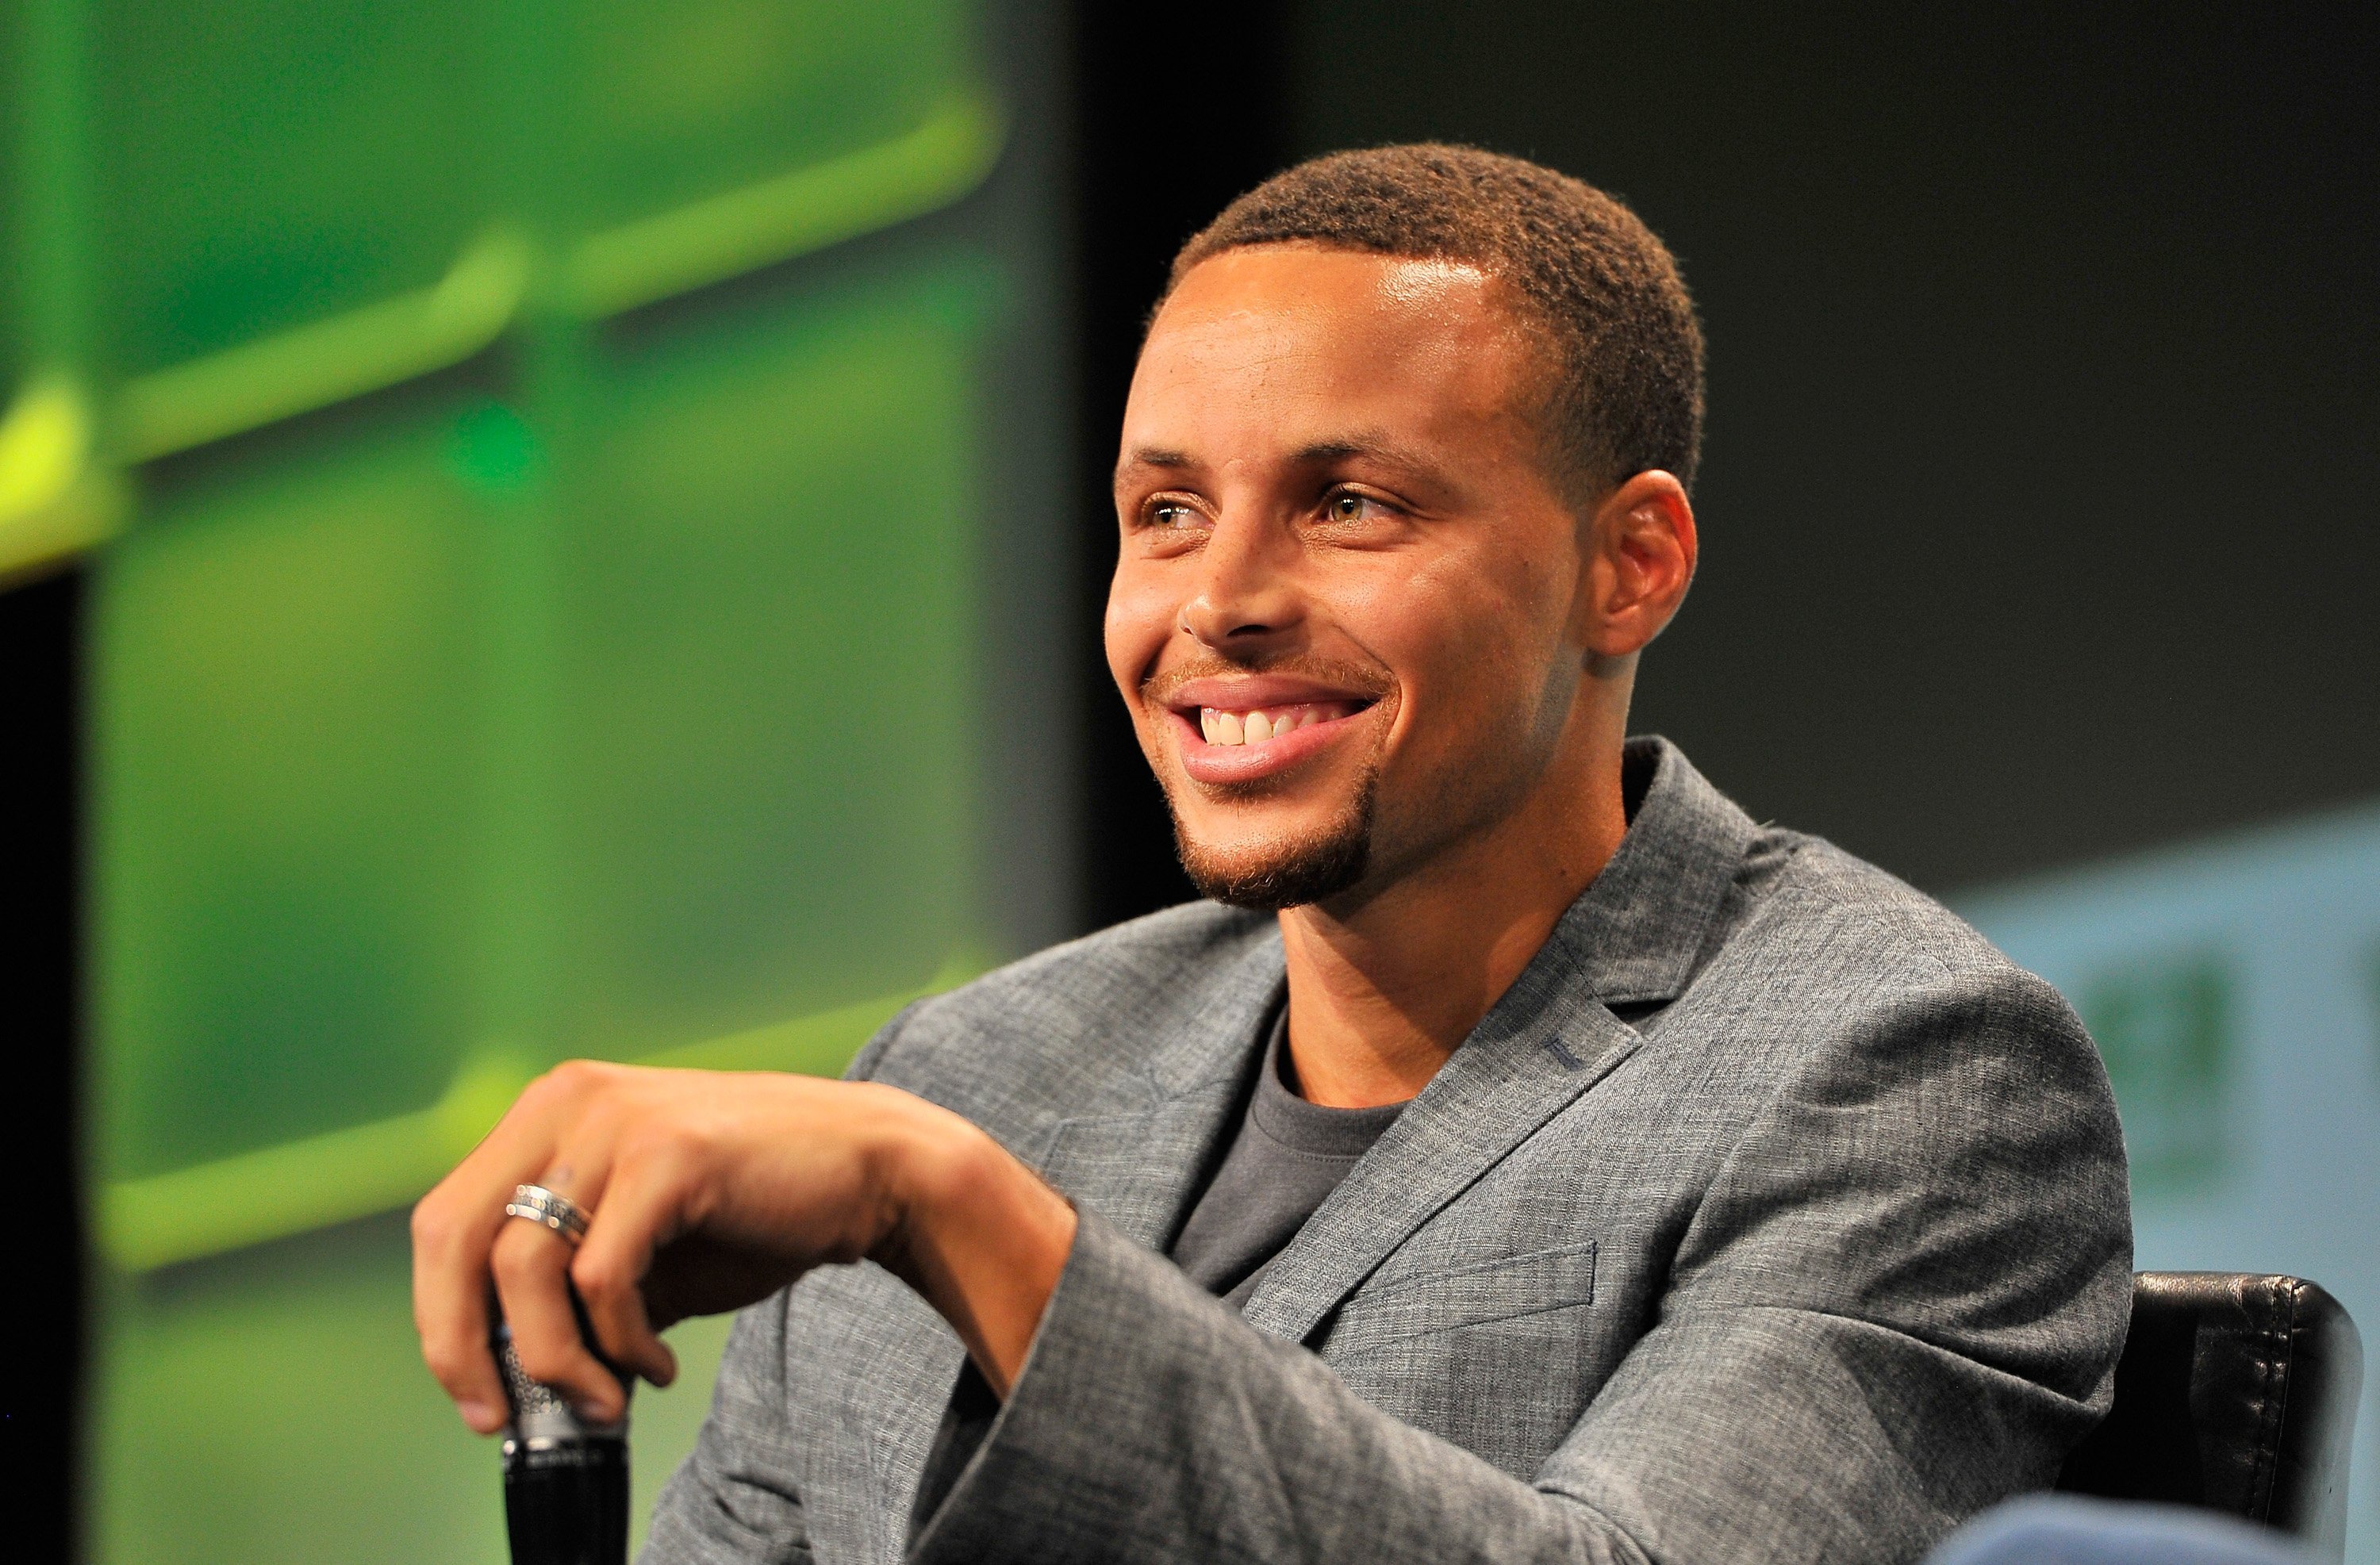 Stephen Curry during a speaking engagement in San Francisco in September 2016. | Photo: Getty Images